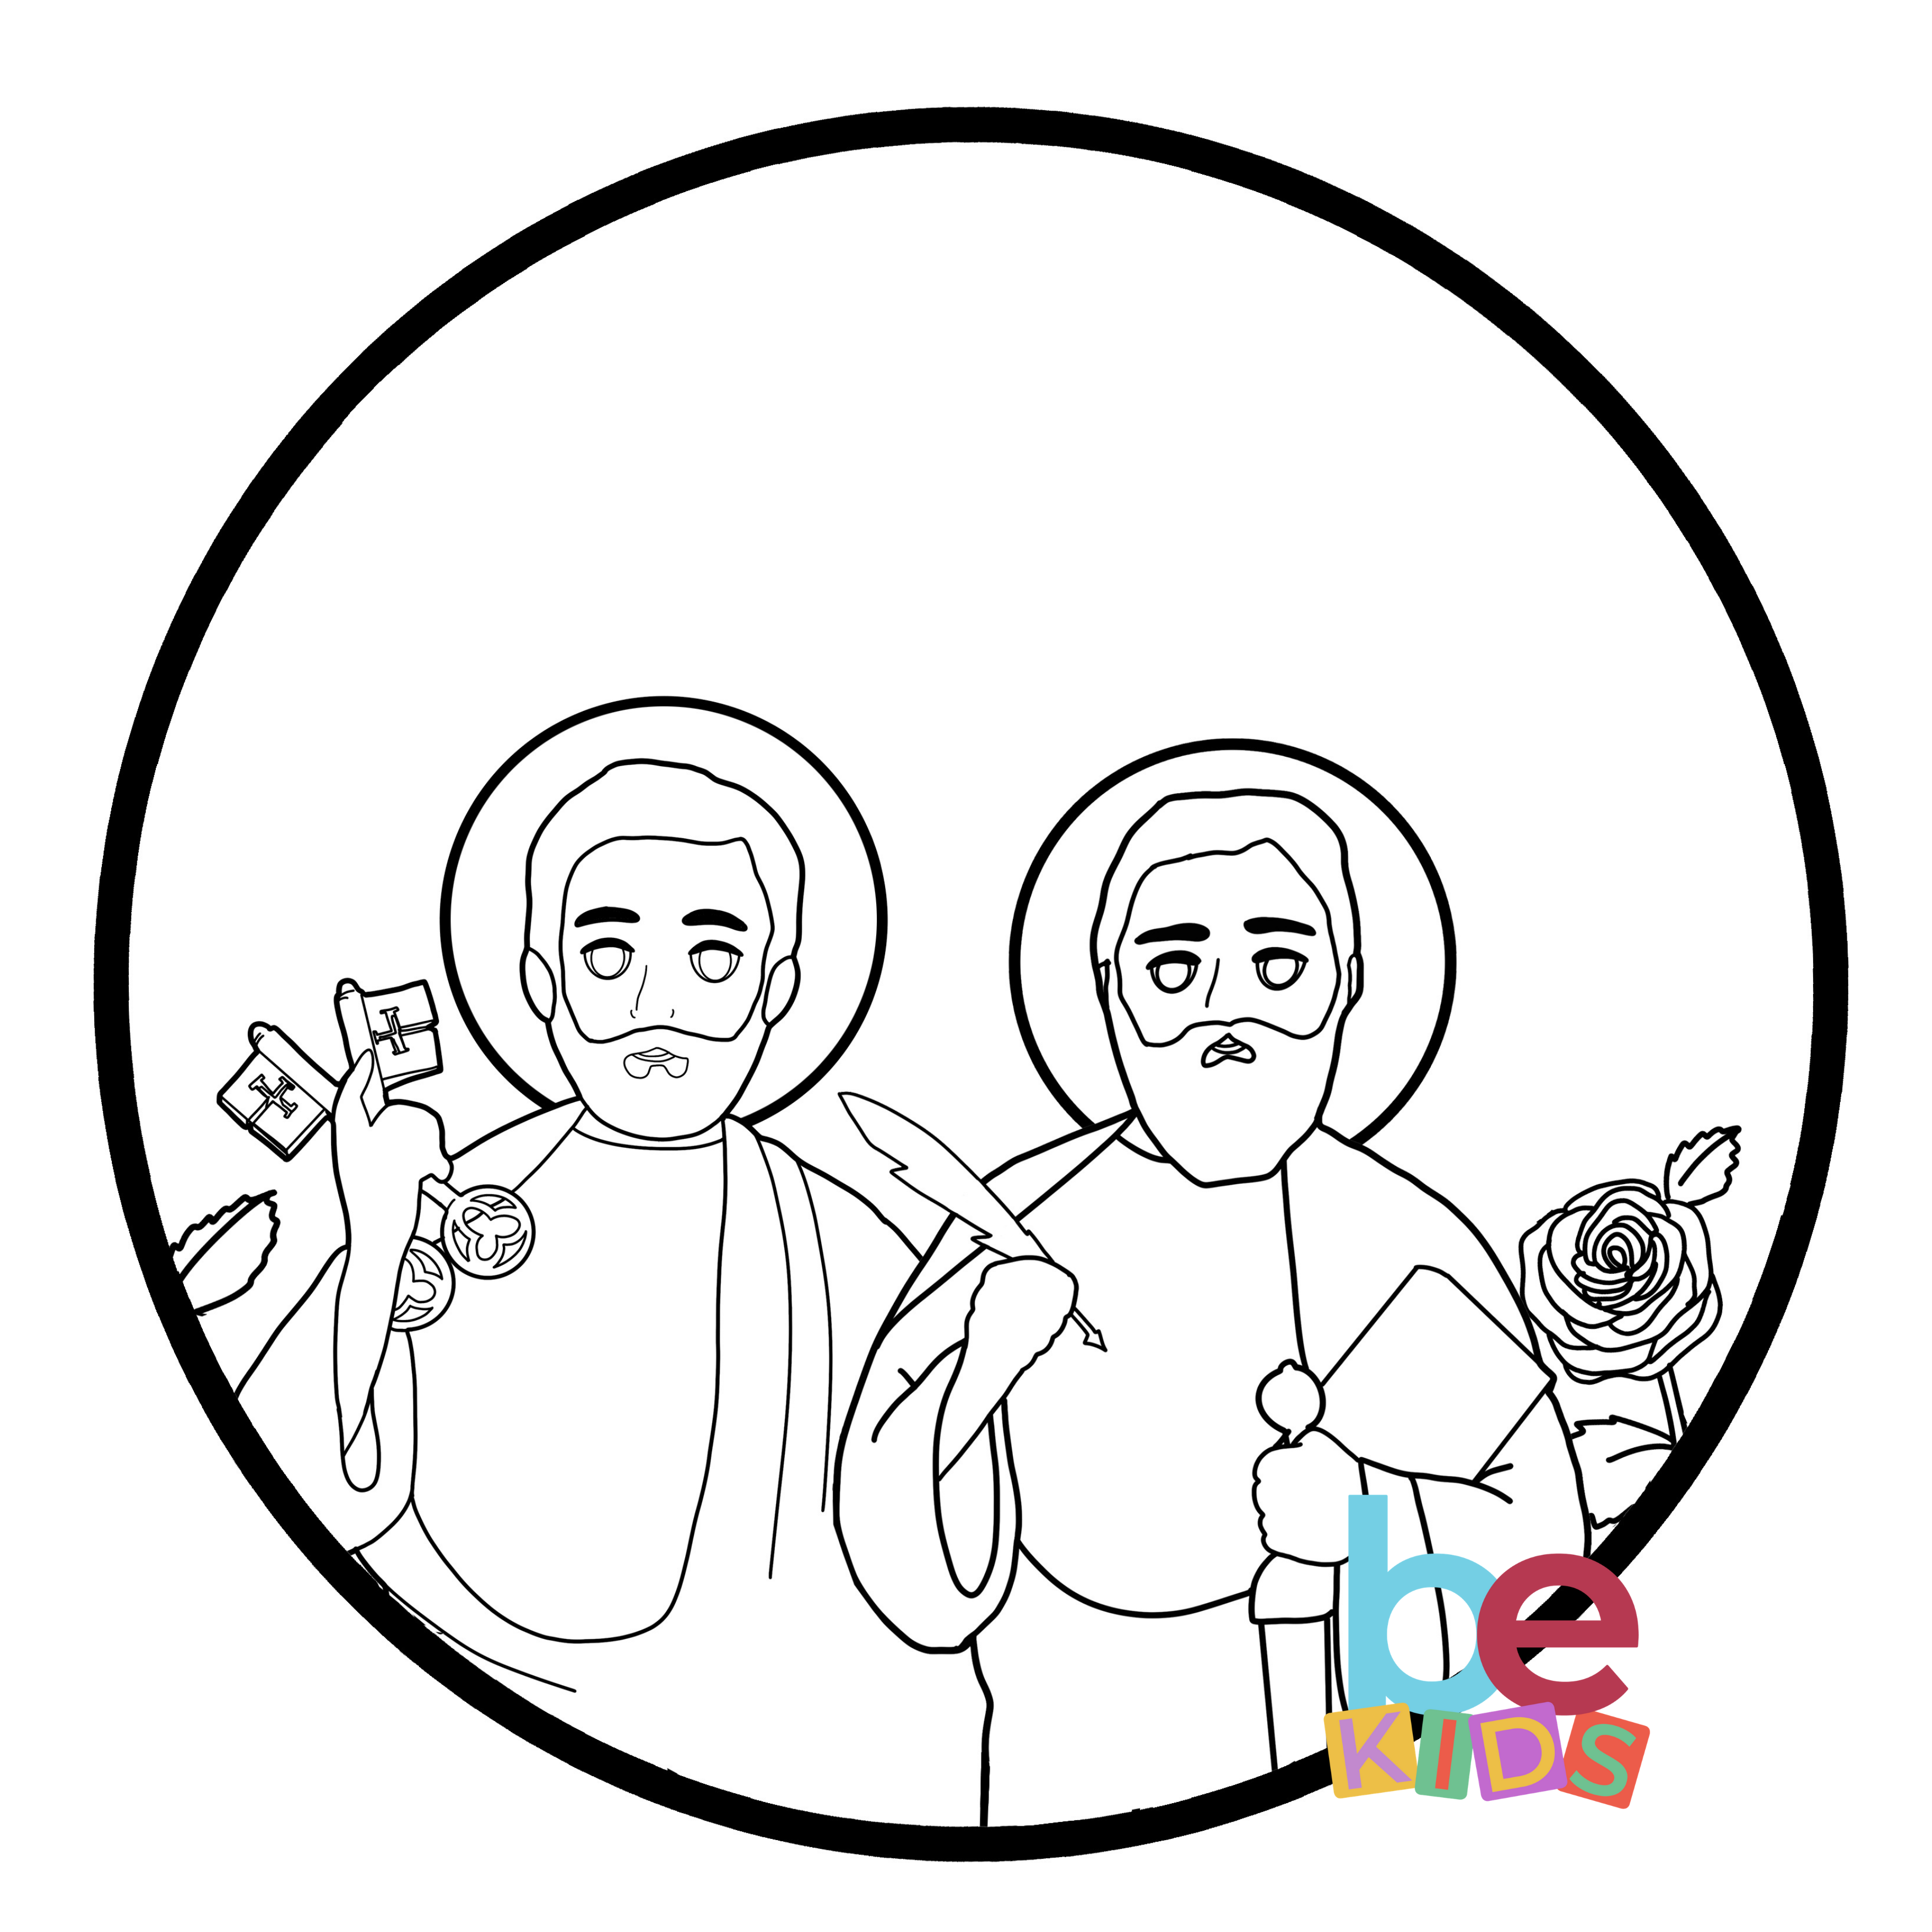 Sts. Peter and Paul - BeKids